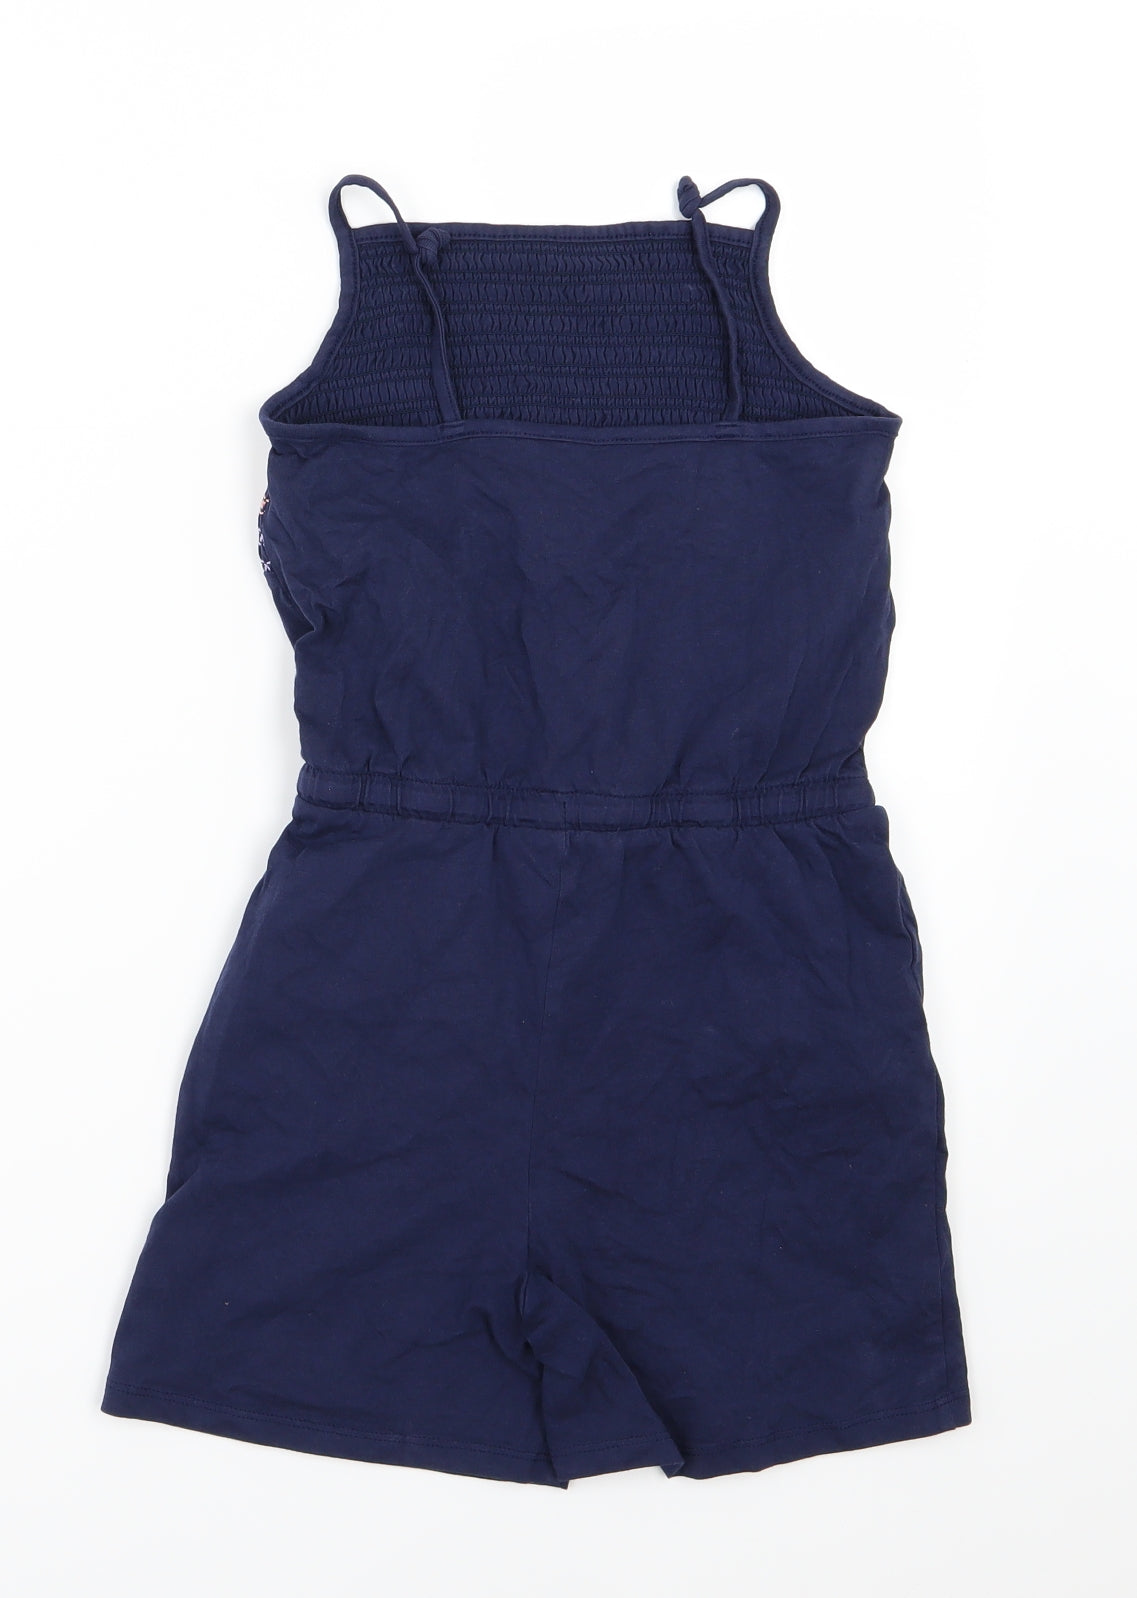 Gap Girls Blue Striped Jersey Playsuit One-Piece Size 8-9 Years